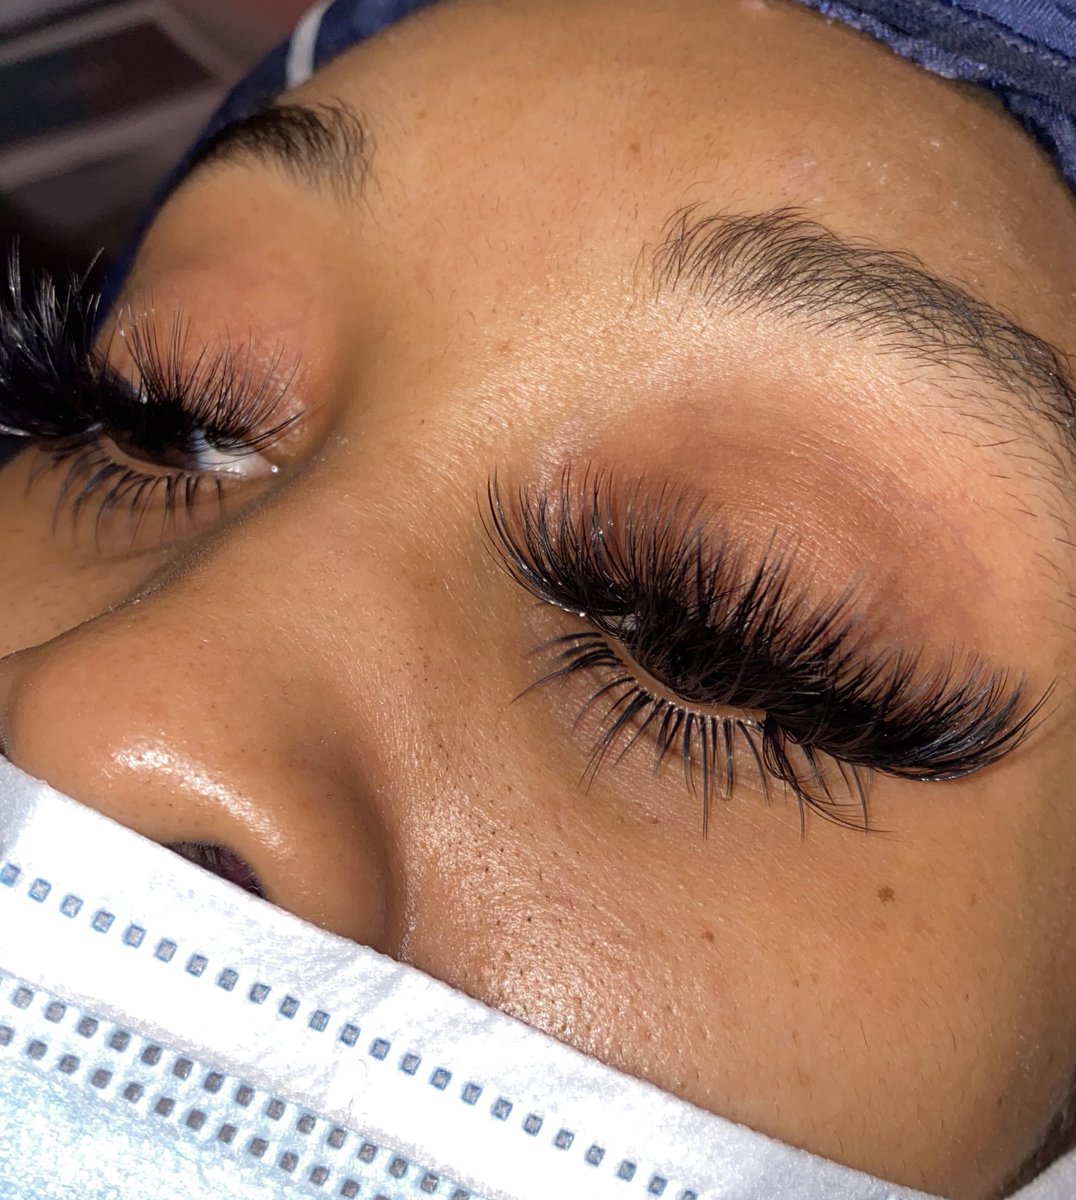 it’s always the lashes for me 😻
-
retweet and share 💗

#charlottelashes #charlottelashtech #nclashes #charlottebraids #atlhairstylist #atllashes #charlottelashextensions #wispylashes #wispylashes #nclashes #charlottelashextensions #atlanta